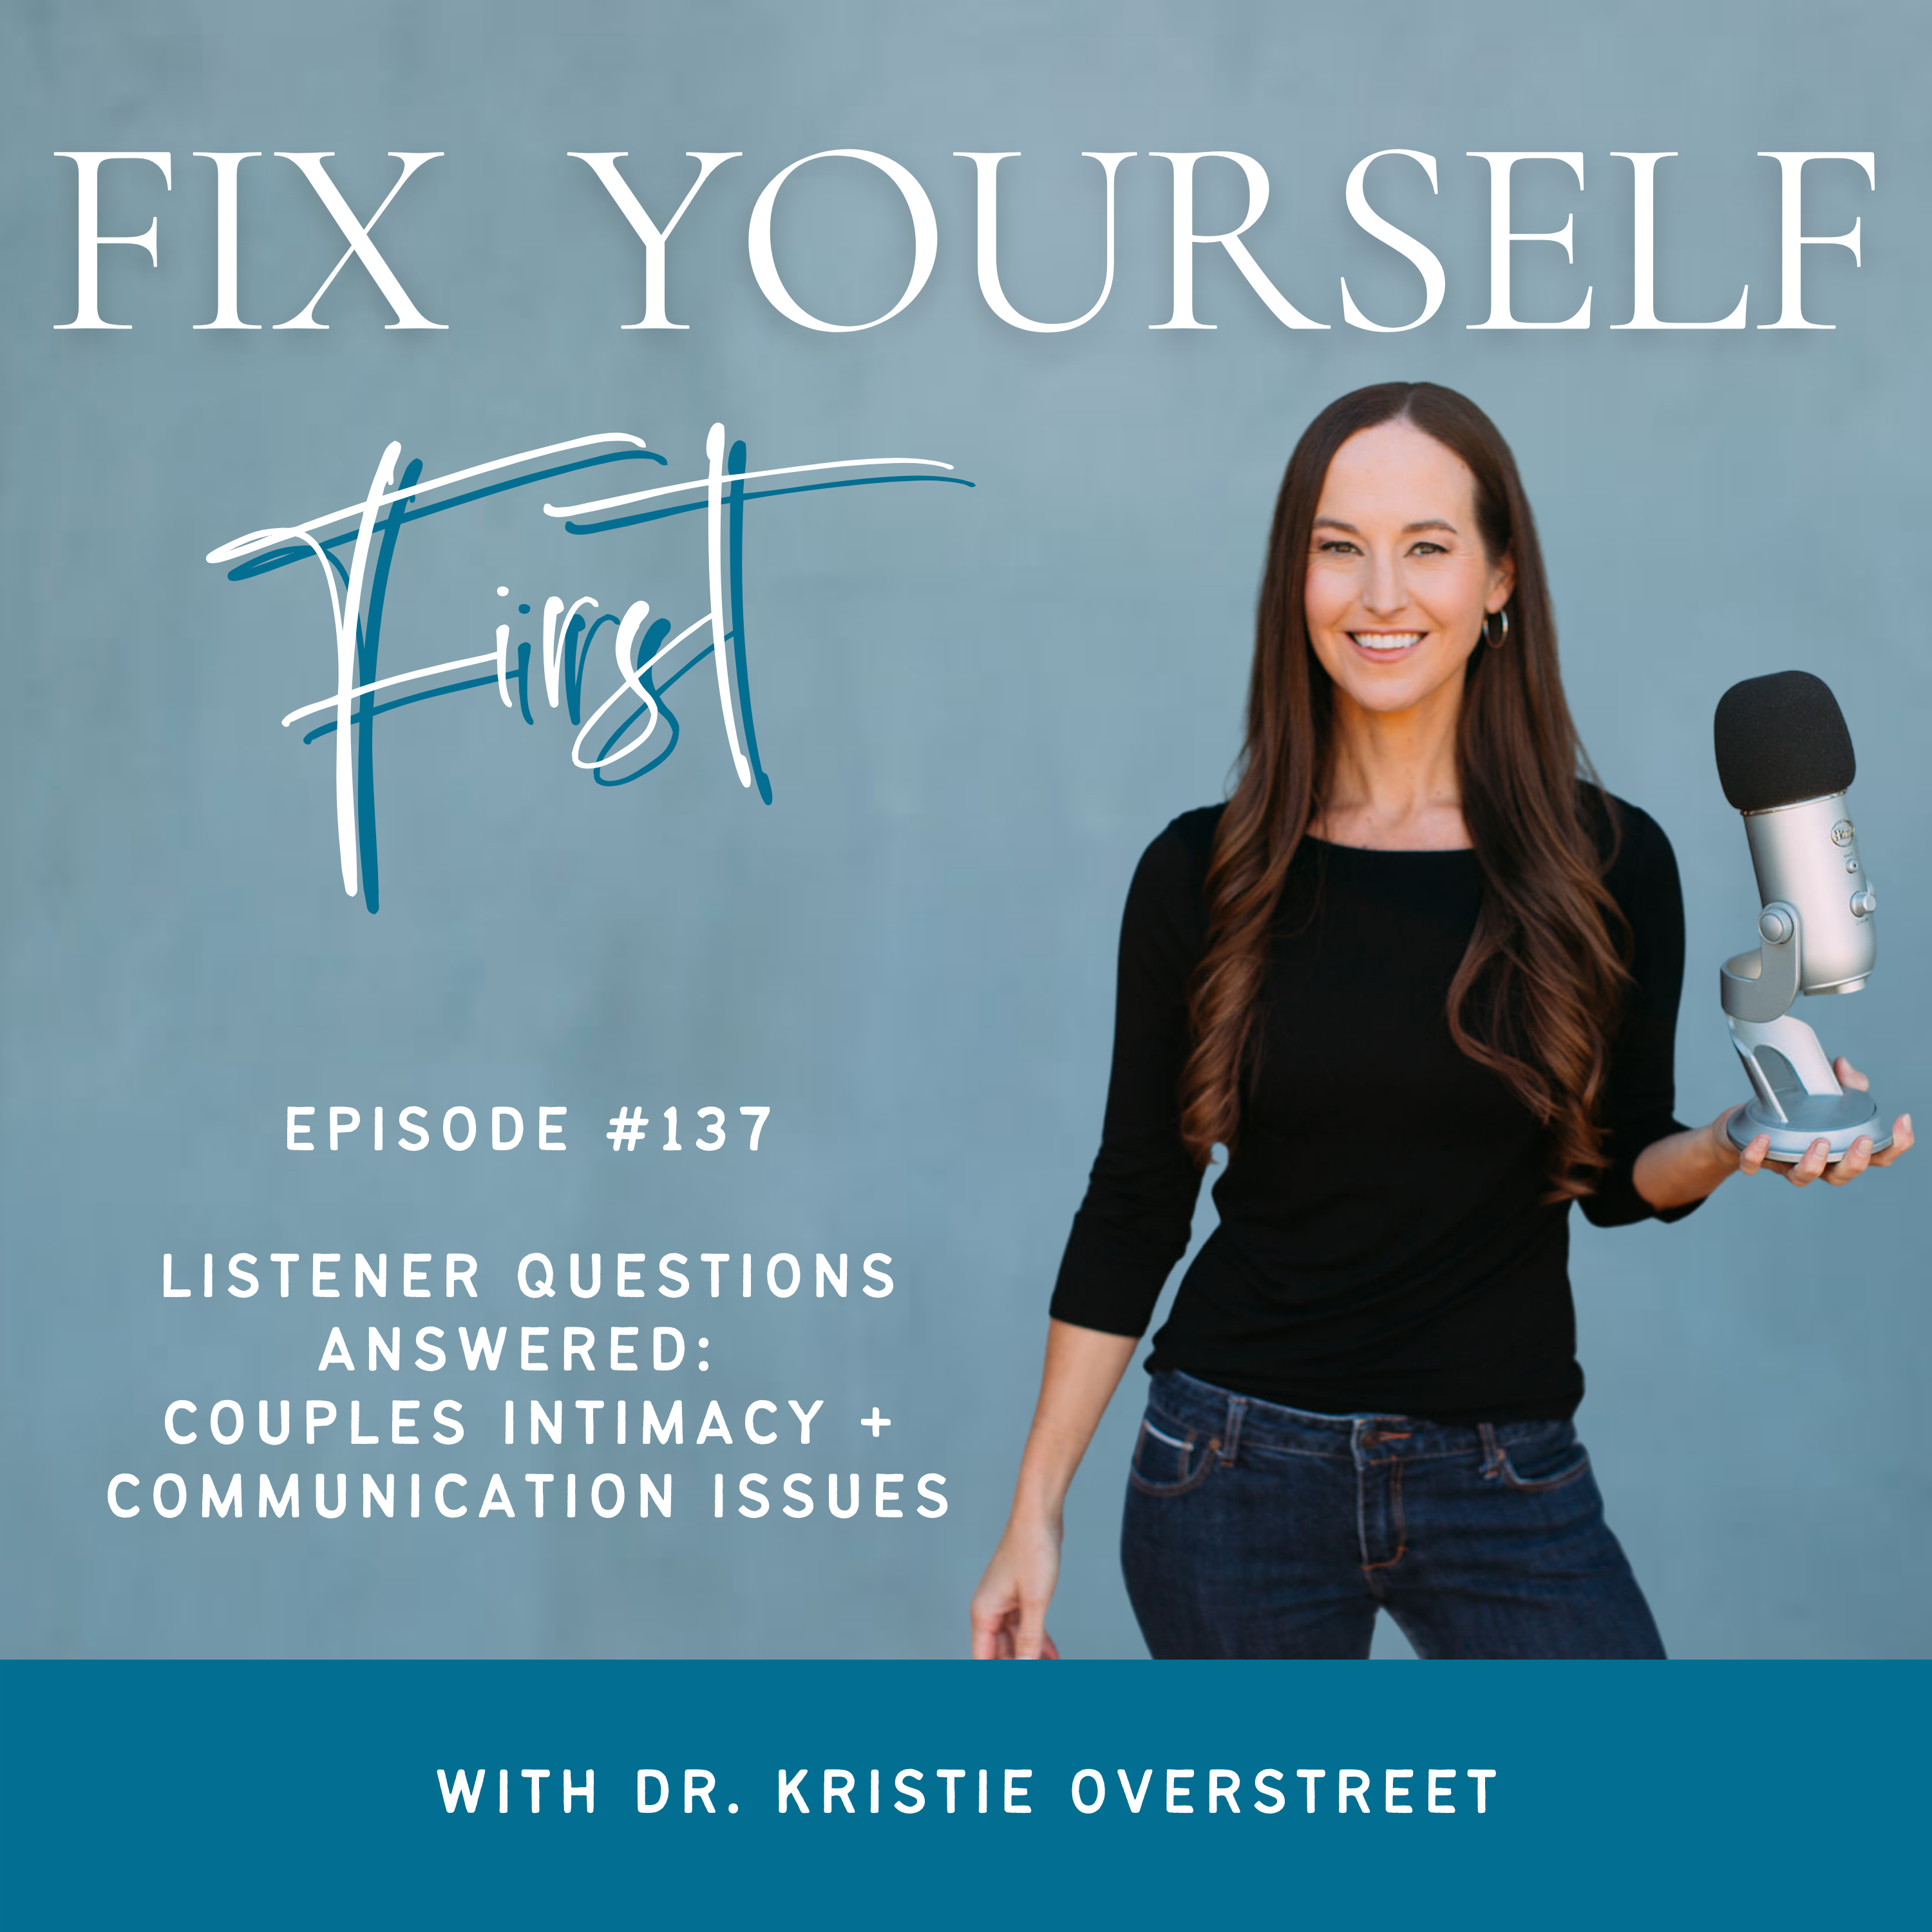 Fix Yourself First Episode 137 Listener Questions Answered: Couples Intimacy + Communication Issues